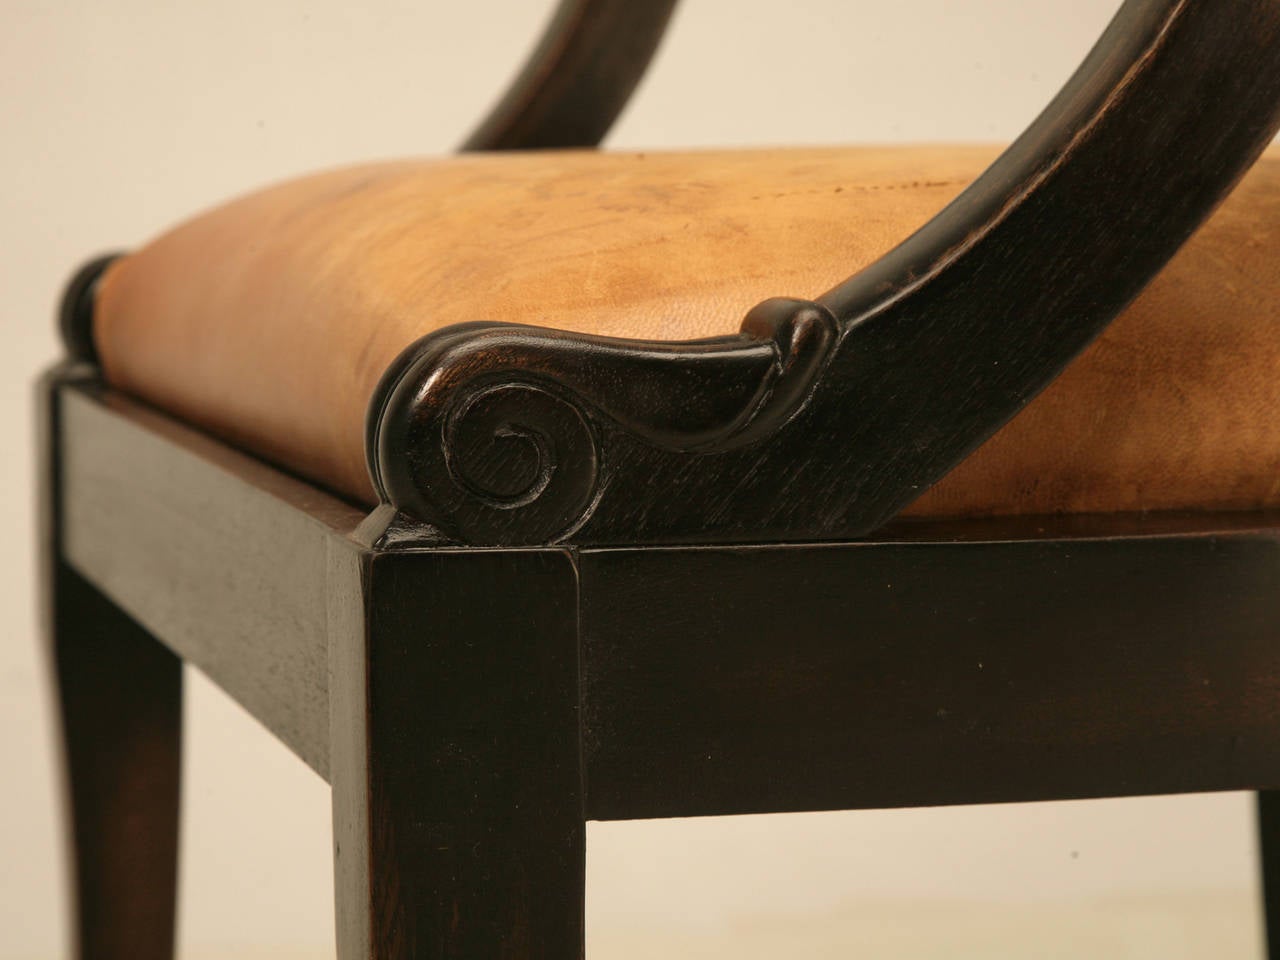 French Ebonized Mahogany Antique Desk Chair with a Leather Seat Cushion 1